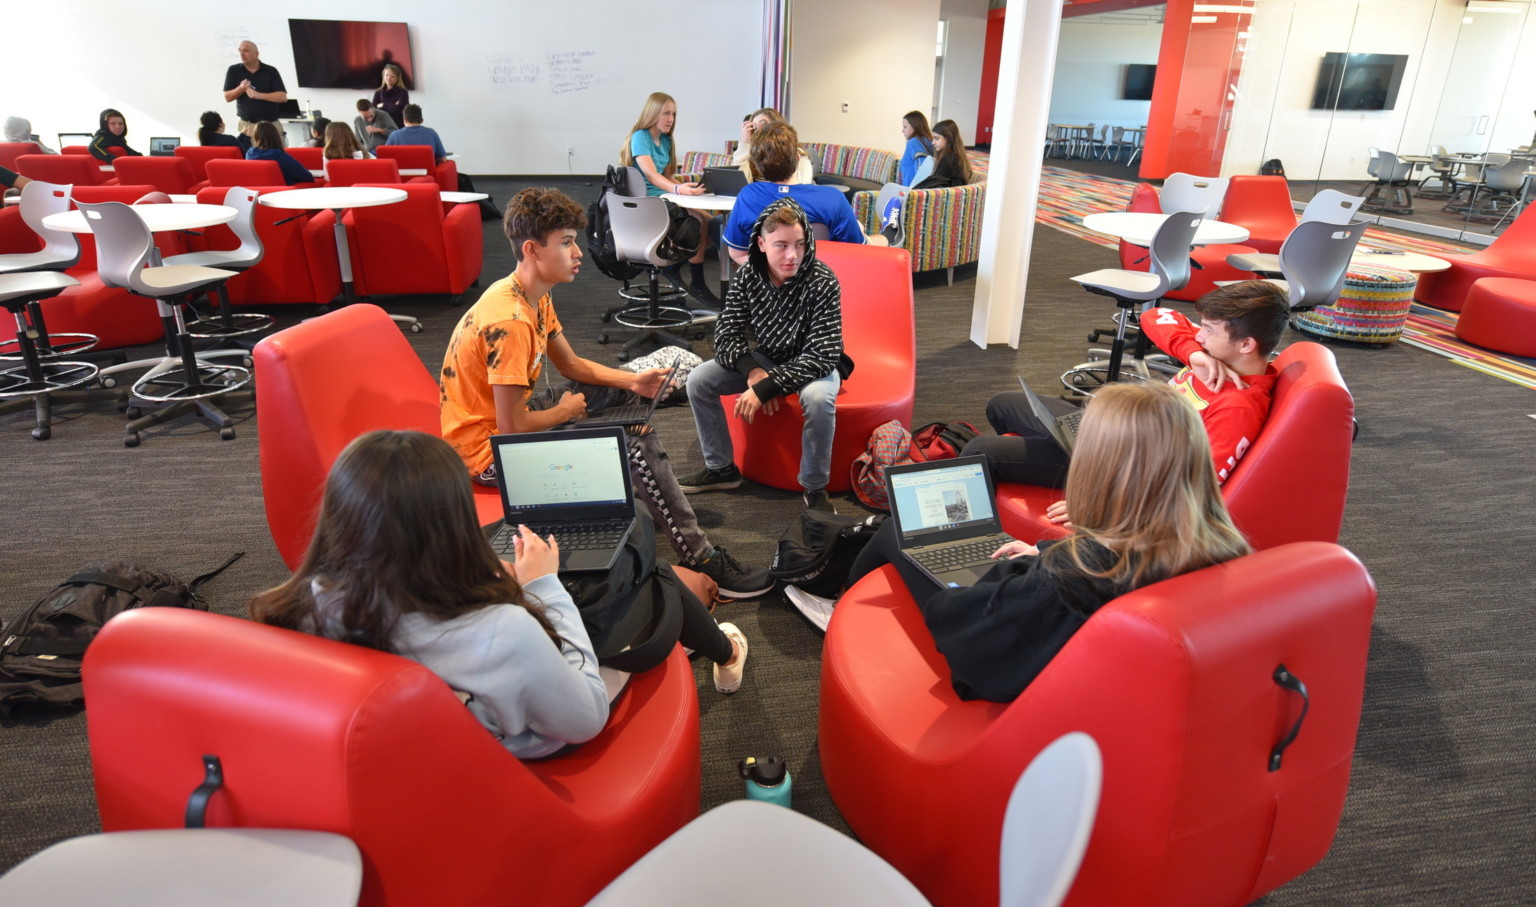 Students working on laptops in red ergonomic chairs in a large open learning space with flexible seating